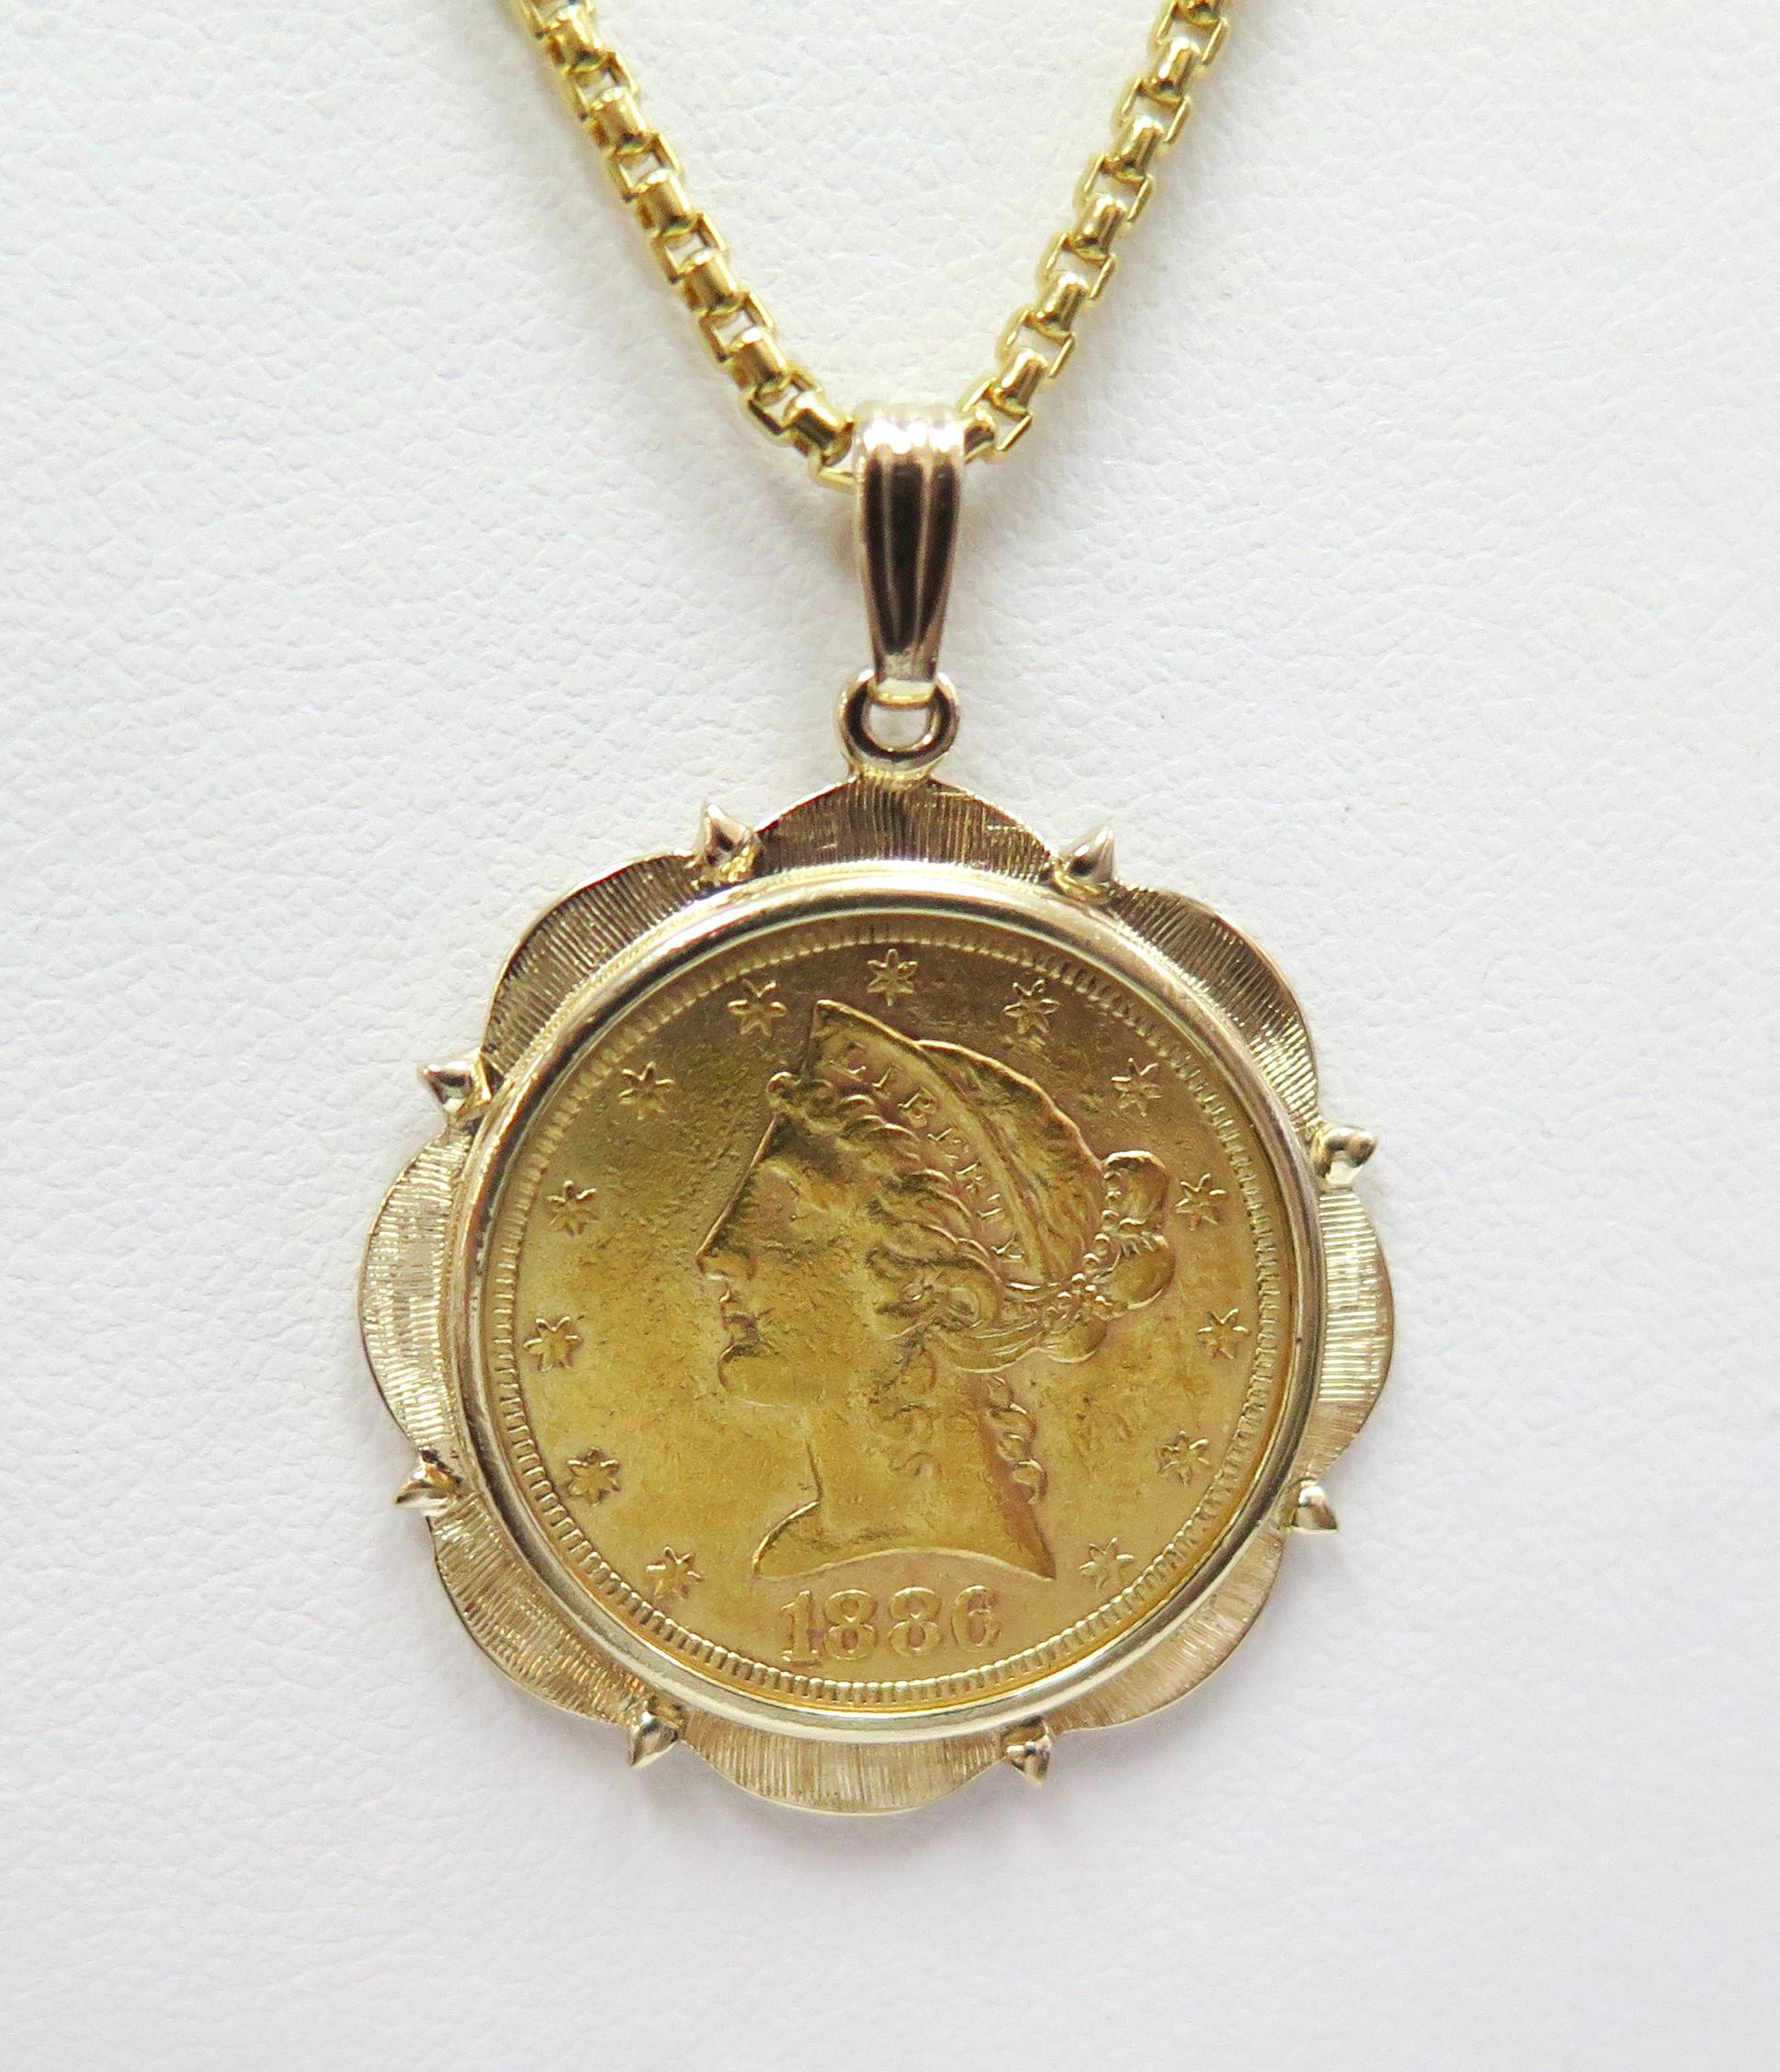 Remarkable beauty and high gold content have made the Gold Liberty Head $5 Gold Piece a long-lasting favorite among collectors. The 1886 S coins' beauty is enhanced in this 14 karat scallop edged bezel. Add to that a 20